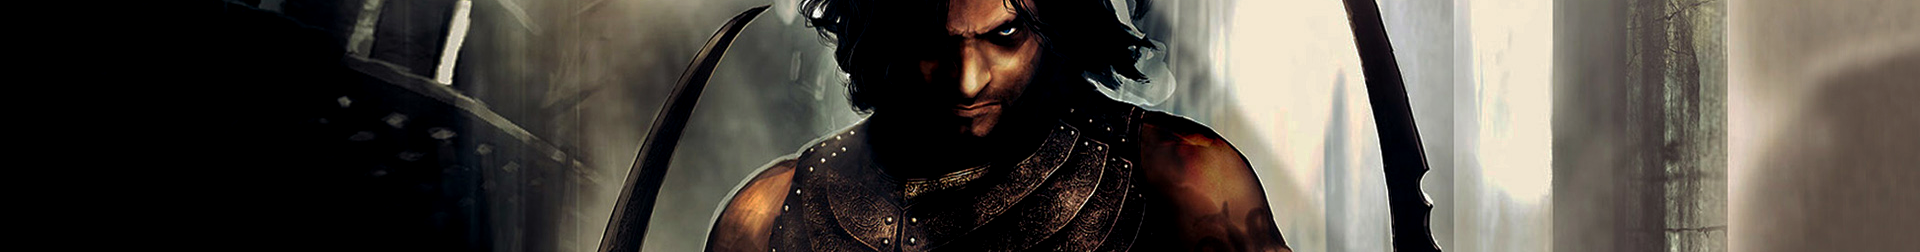 Prince of Persia: Warrior Within Banner